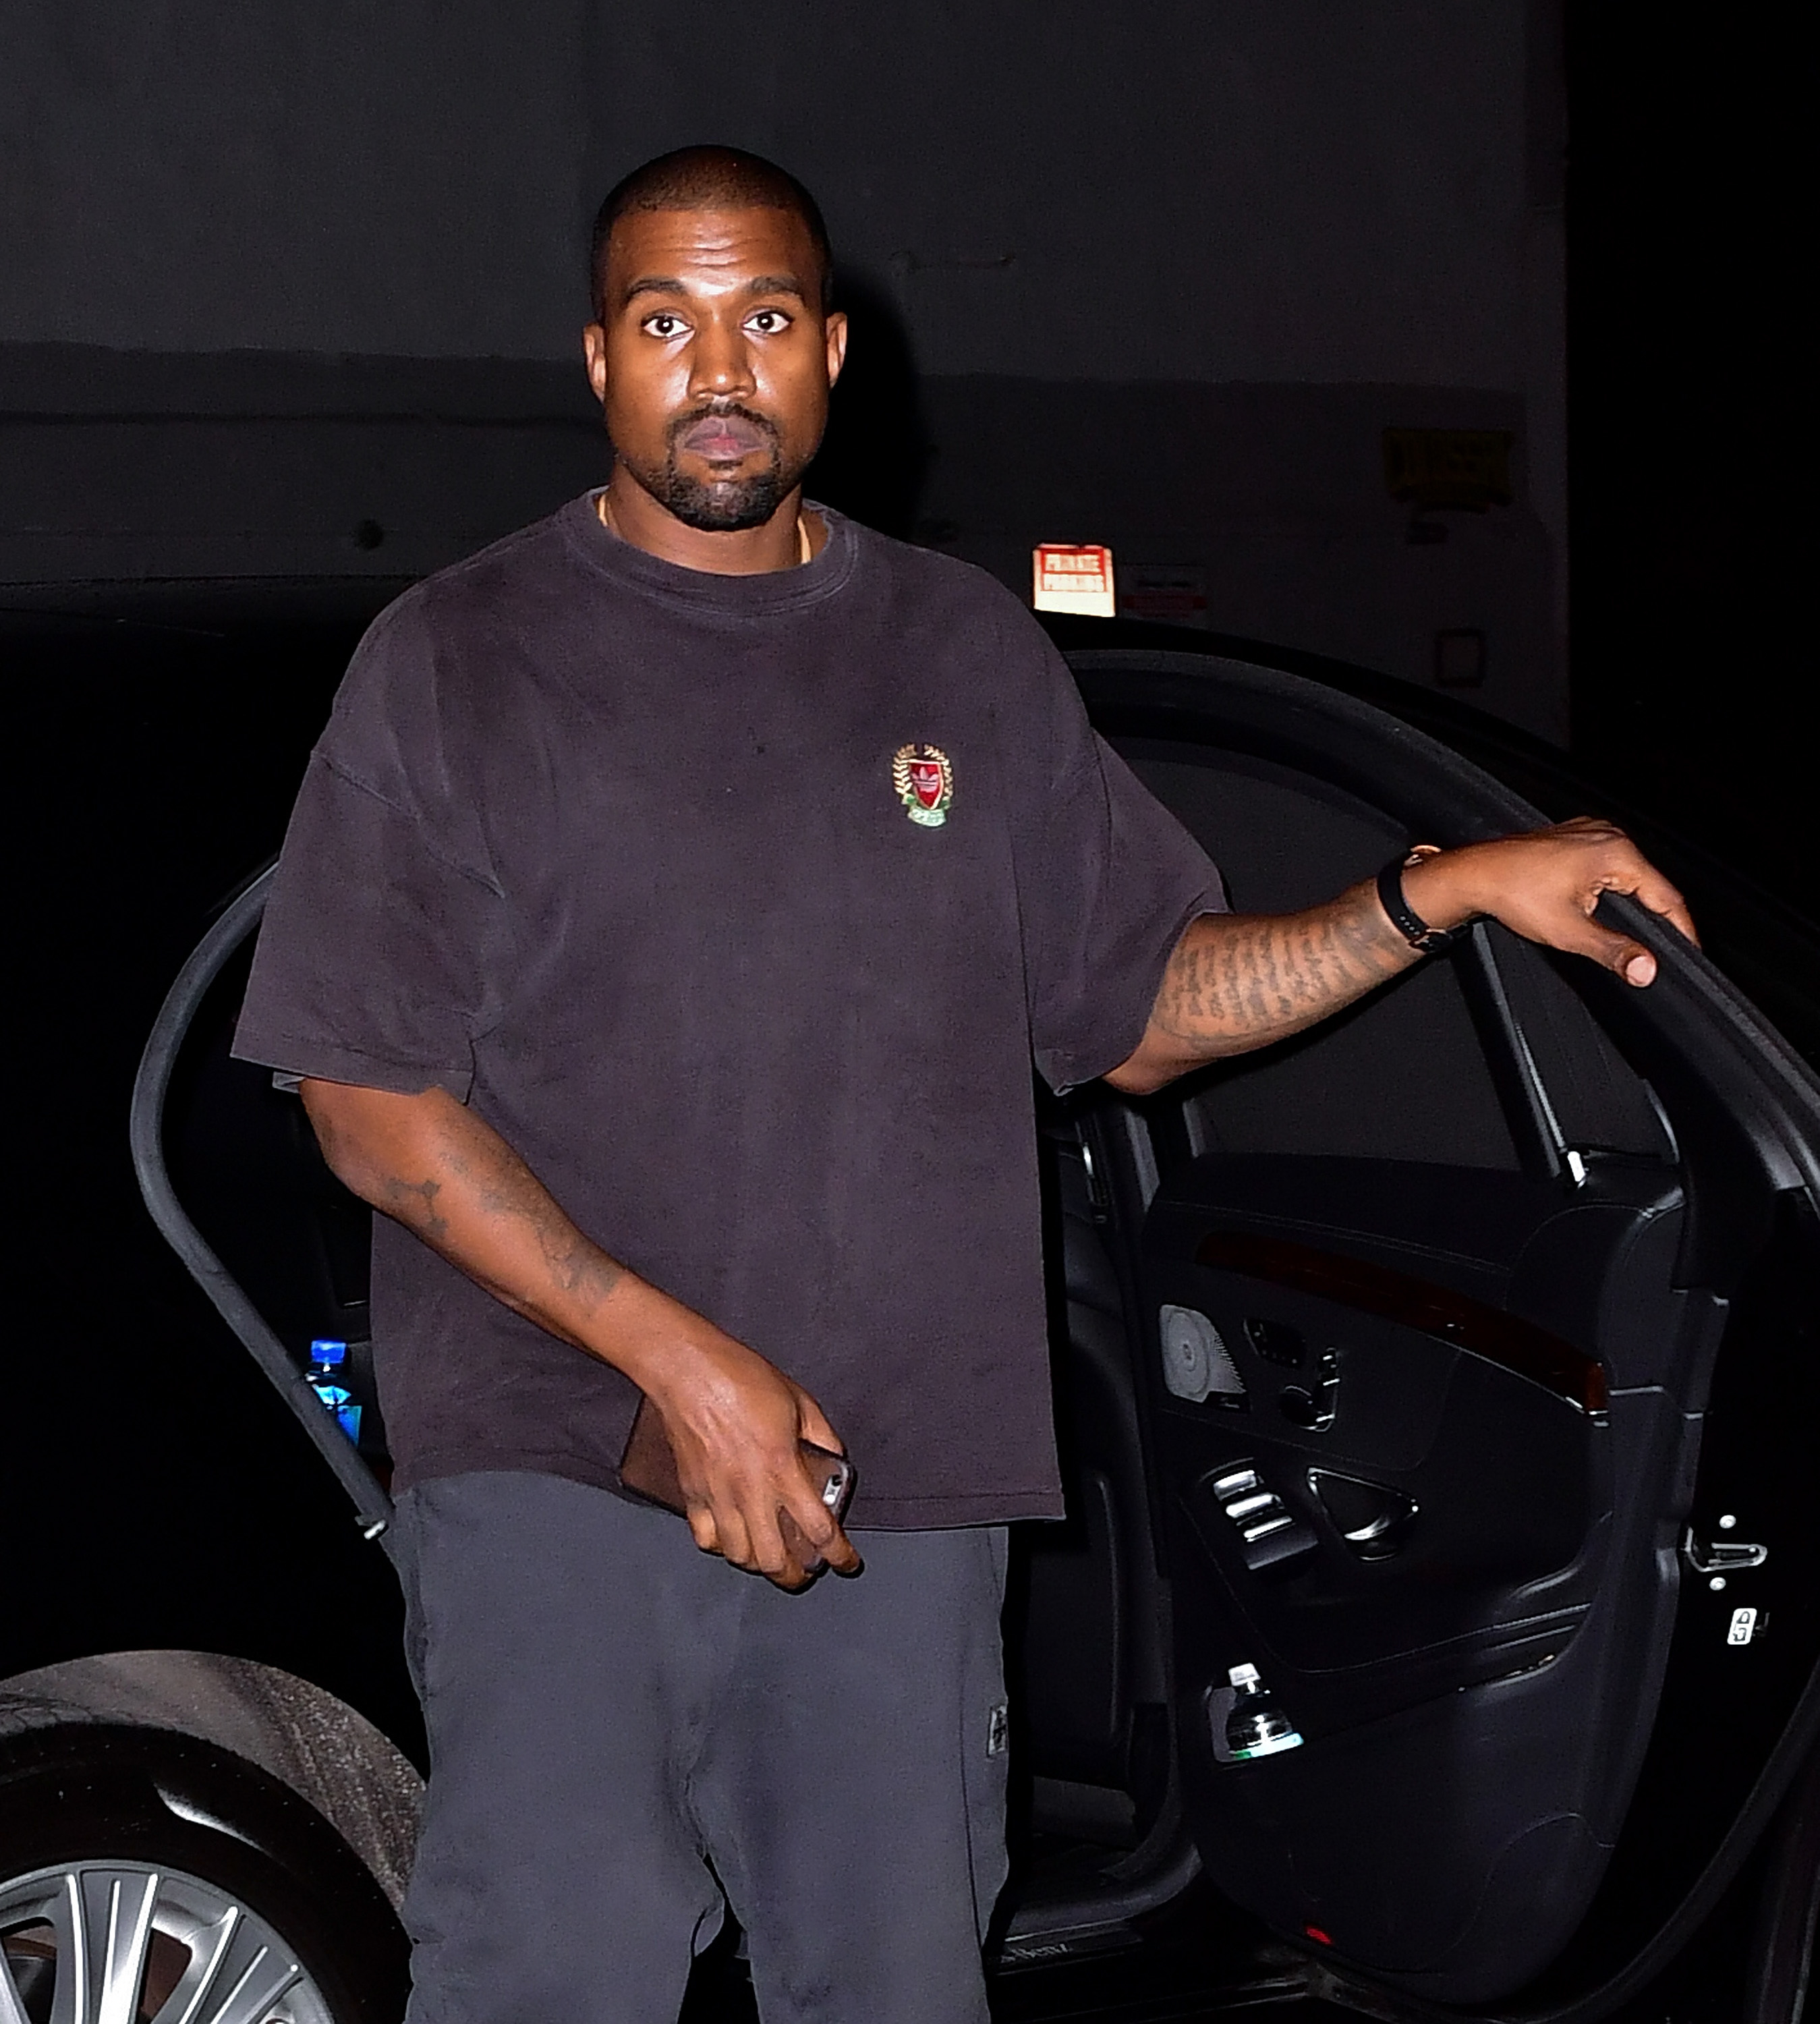 <p>In 2016, <a href="https://www.wonderwall.com/celebrity/profiles/overview/kanye-west-325.article">Kanye West</a> -- seen here in New York City that September -- didn't feel he was looking his best. So he quietly underwent a plastic surgery procedure that, he later told TMZ, led to an opioid addiction.</p>